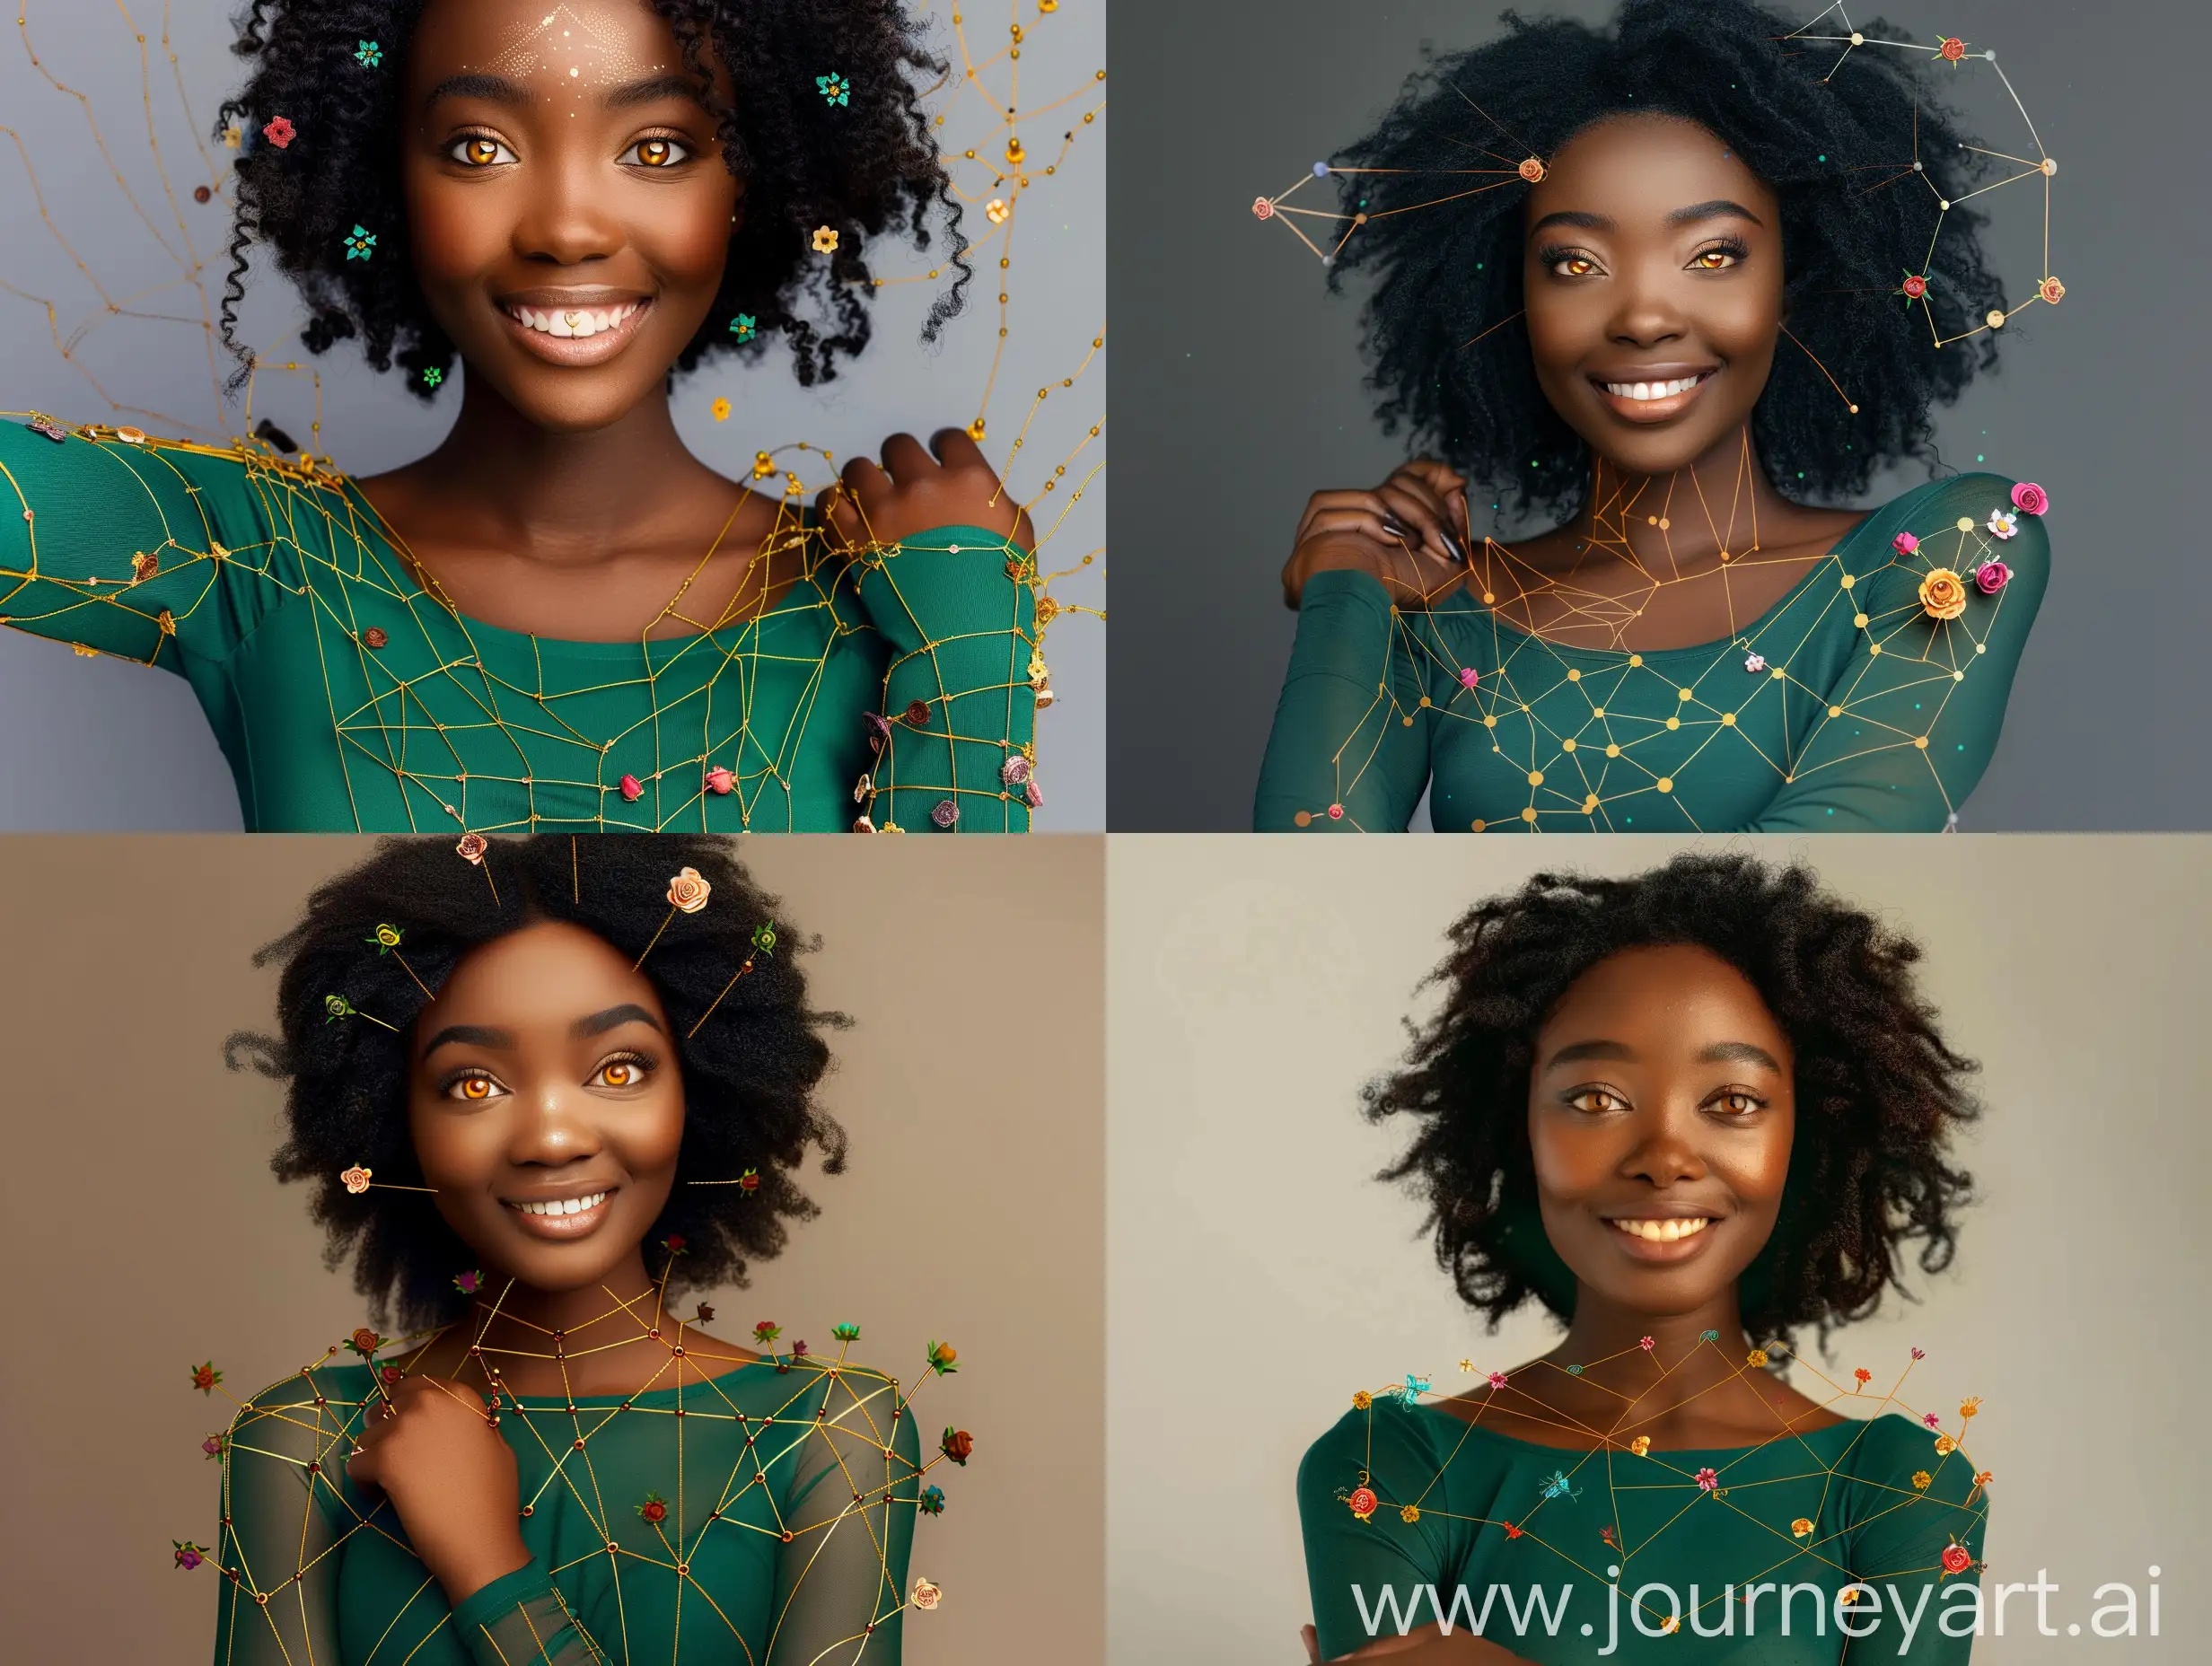 Very Cute smiling 23 year old black African girl with almond shaped large amber eyes and assorted colorful tiny flowers and roses growing in her waist length natural blow dried 4c hair, she is wearing a figure hugging emerald green top and her arms are folded infront  of her there are thin golden veins climbing up her arms in a geometric pattern from the fingers and stopping just above the elbows 